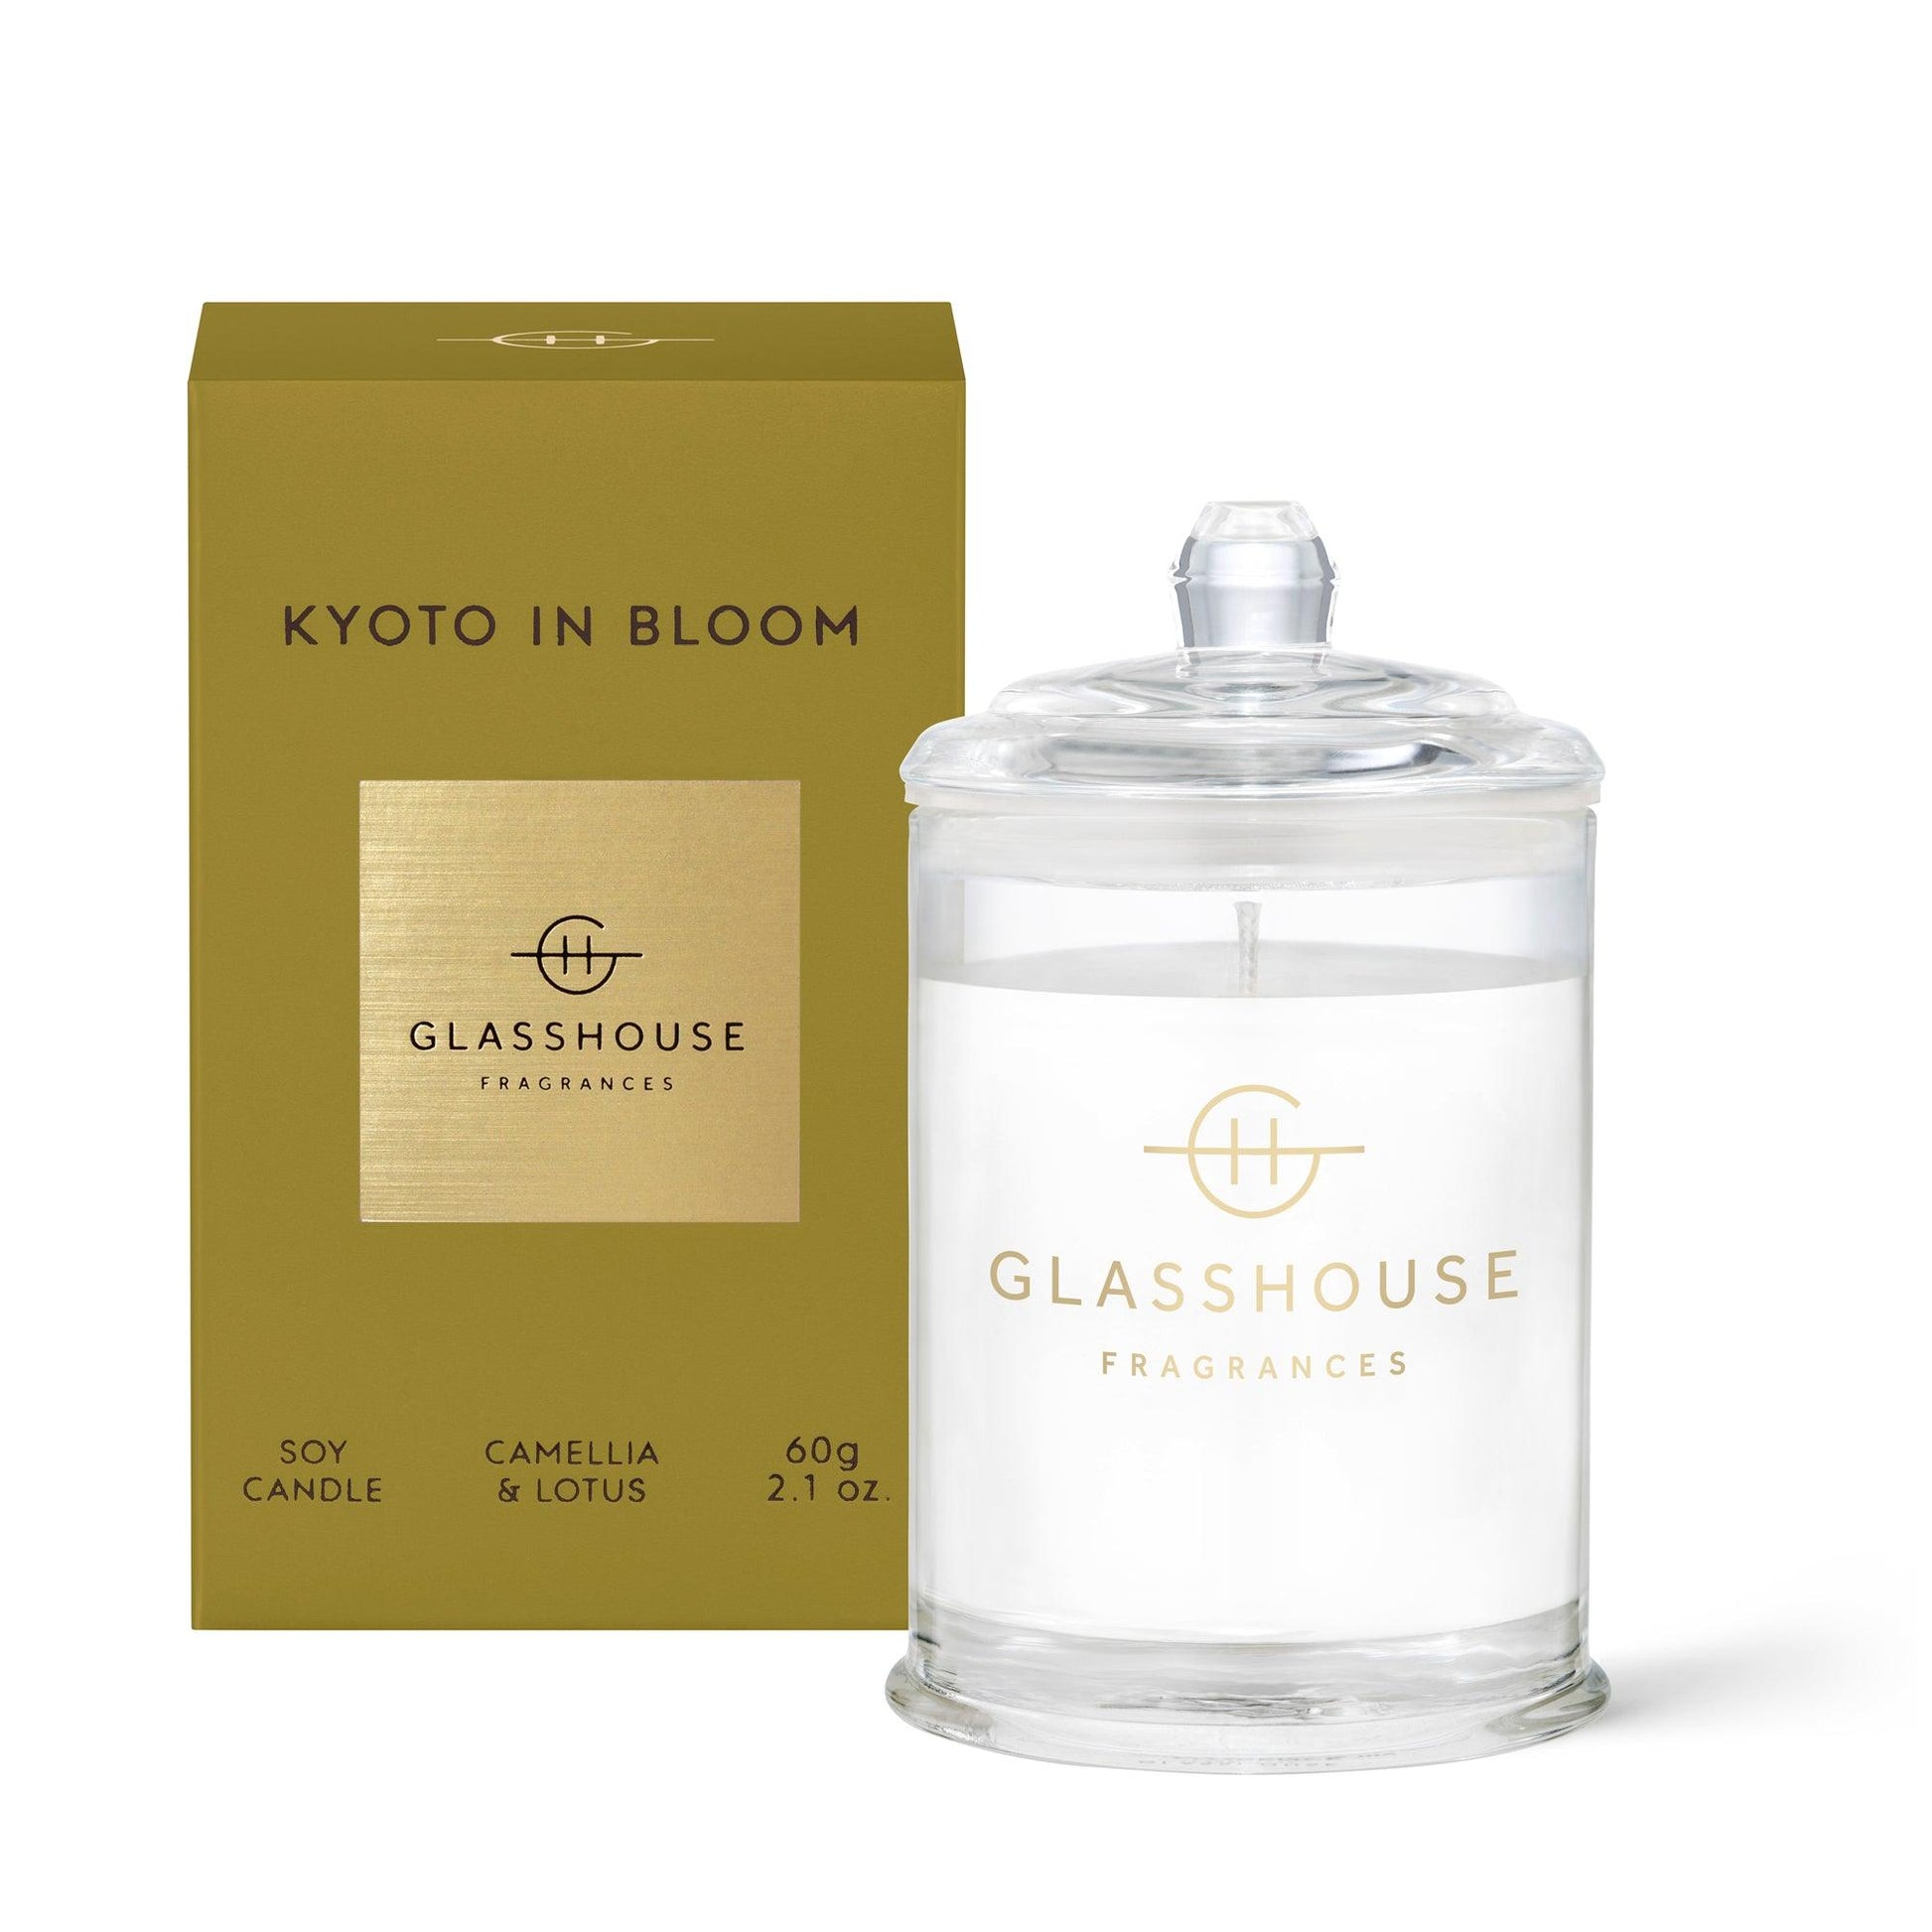 GF 60g KYOTO IN BLOOM Candle - Handworks Nouveau Paperie